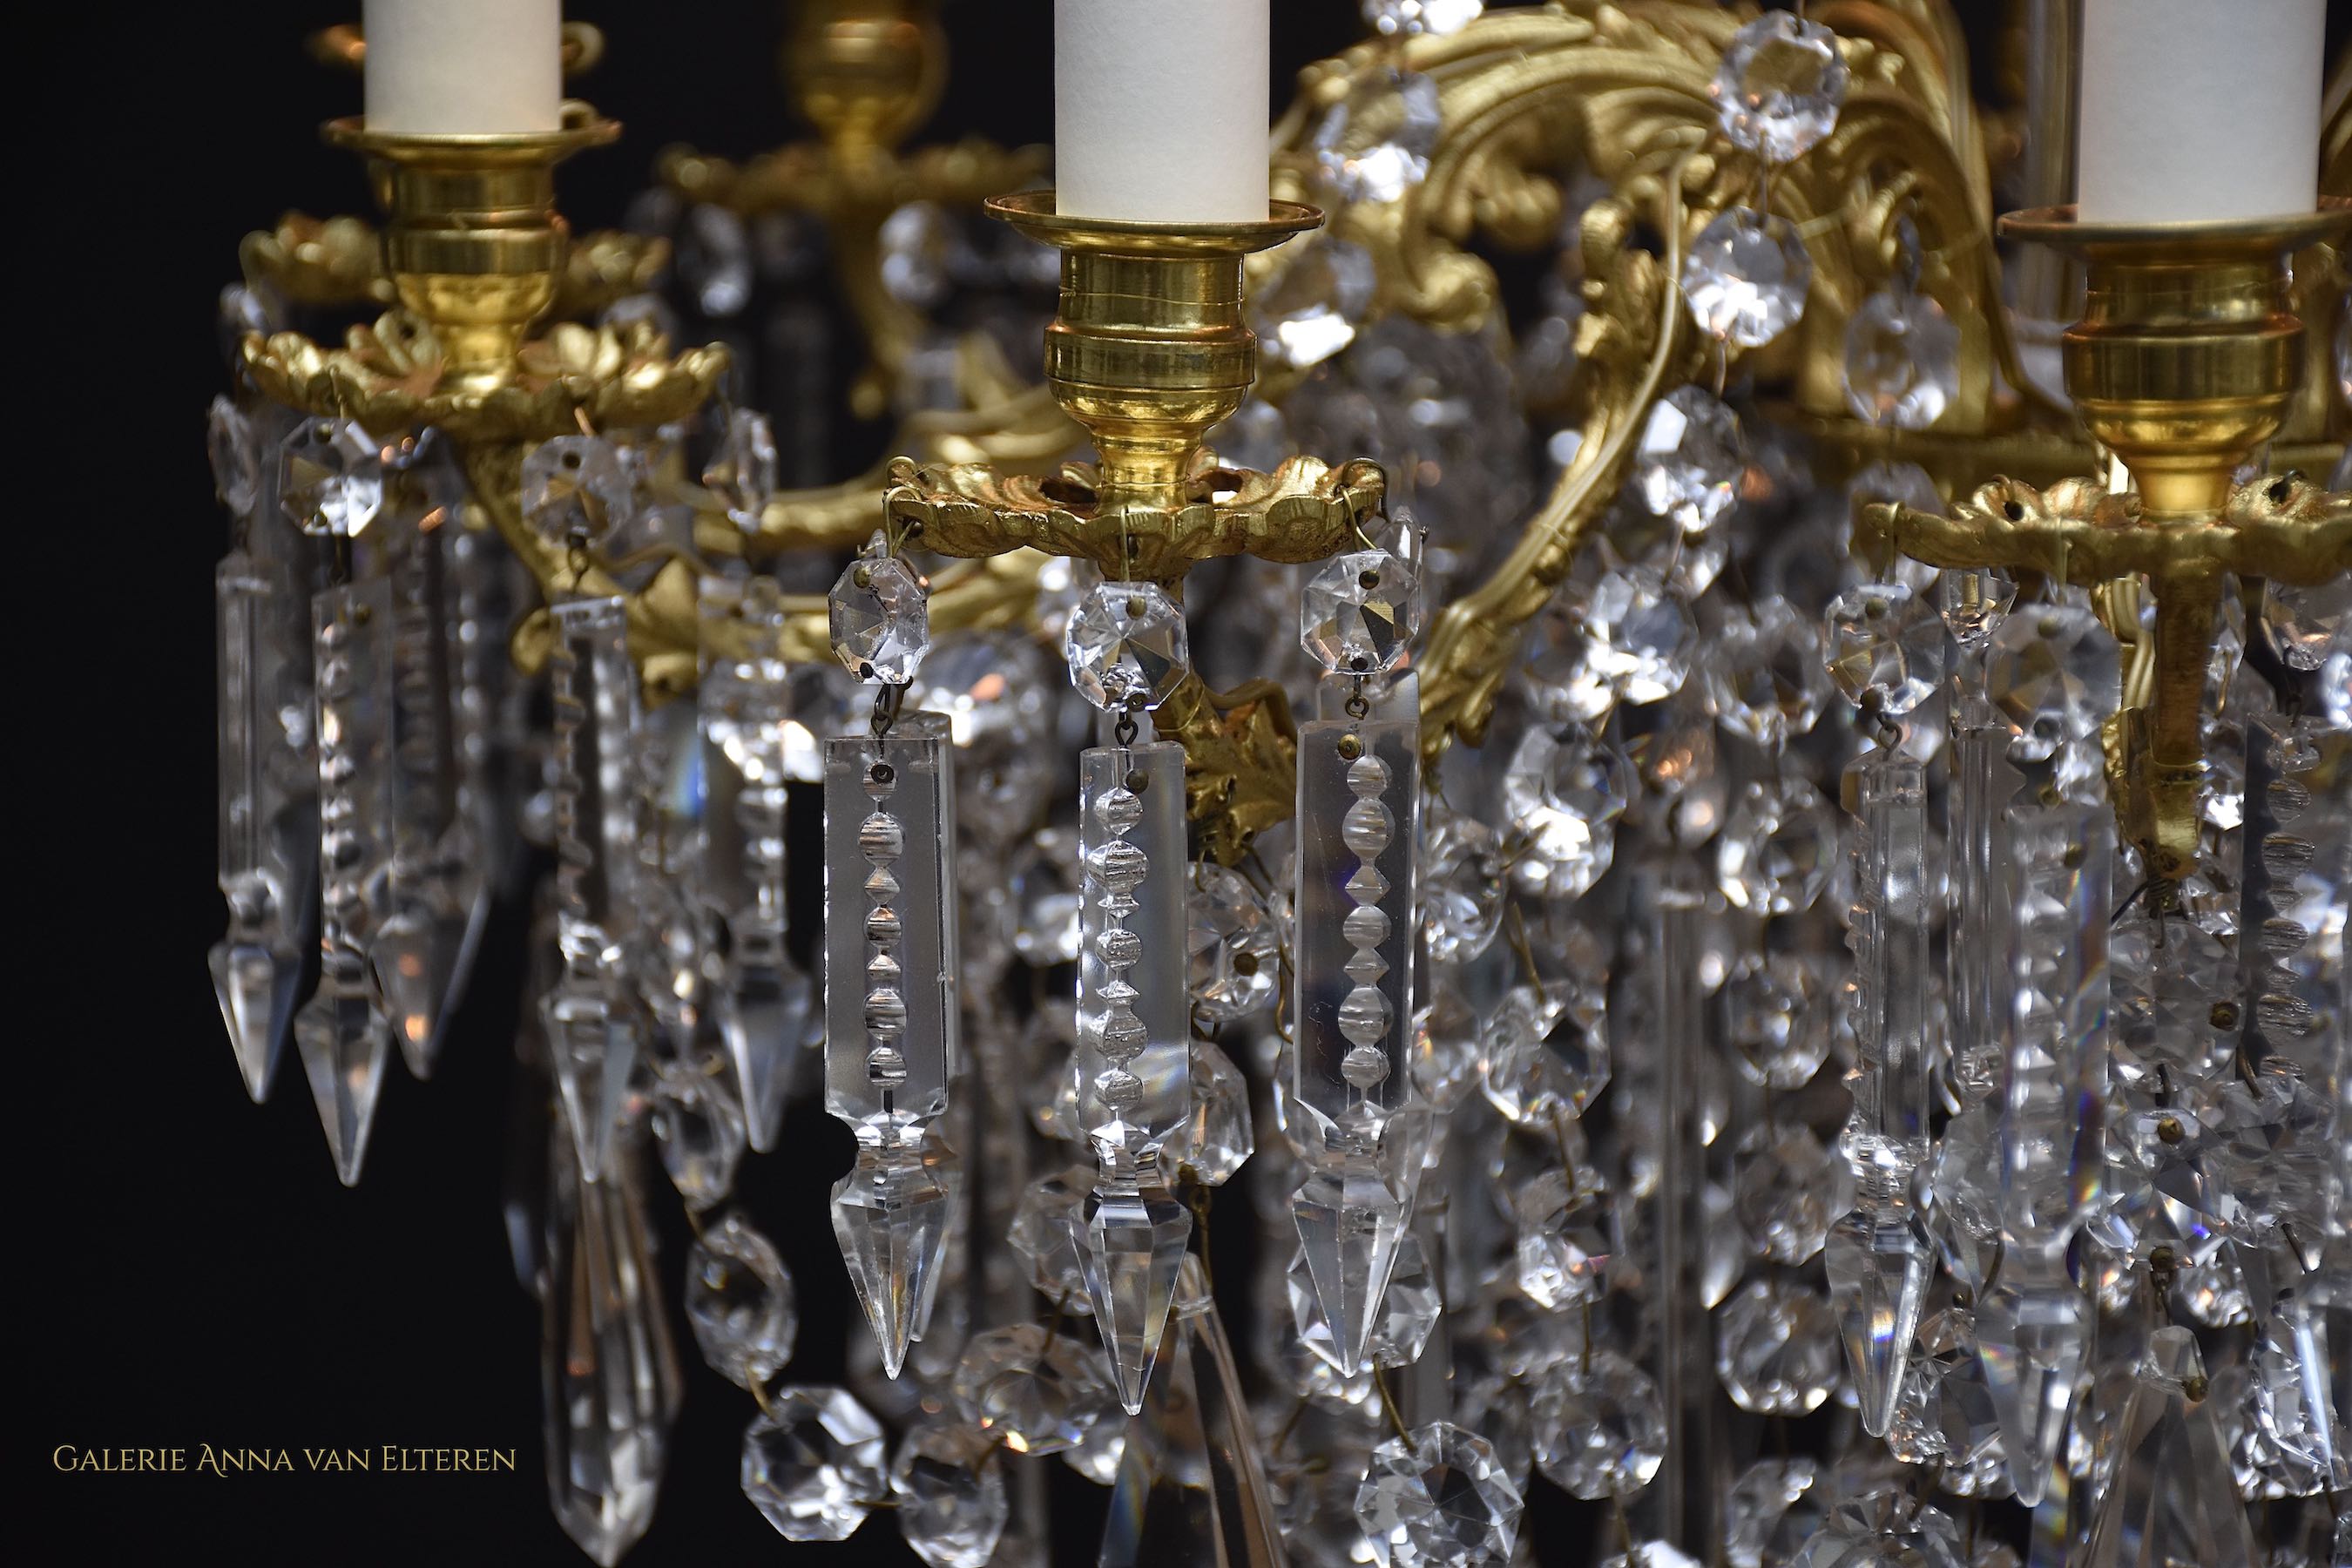 Gilt bronze Baccarat chandelier in the style of Louis XVI